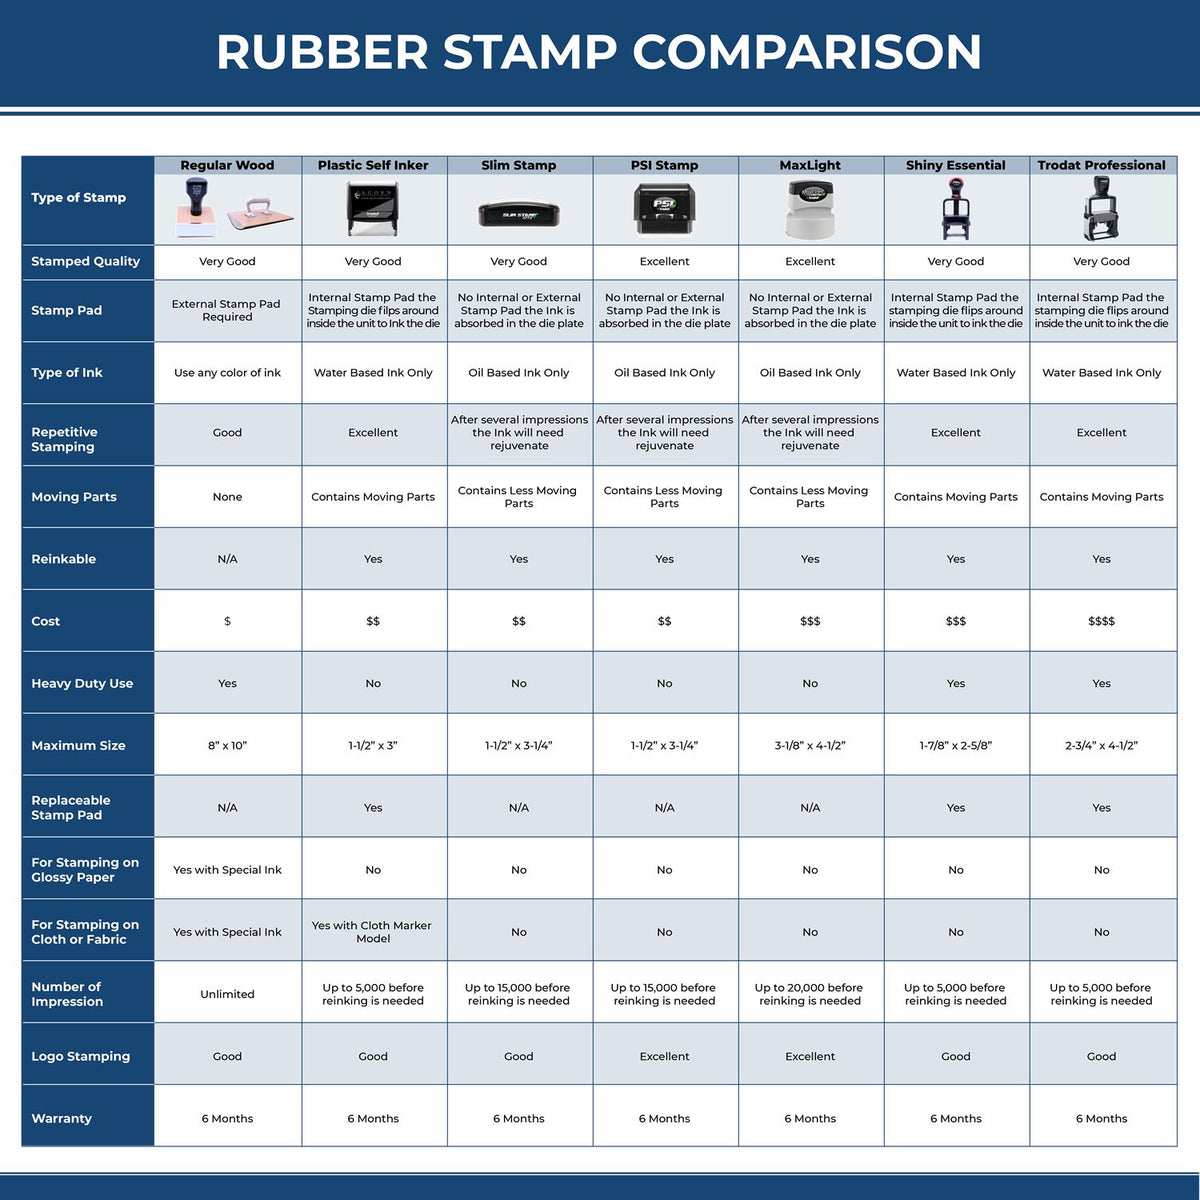 Large Self-Inking Correo Aero Stamp 5521S Rubber Stamp Comparison